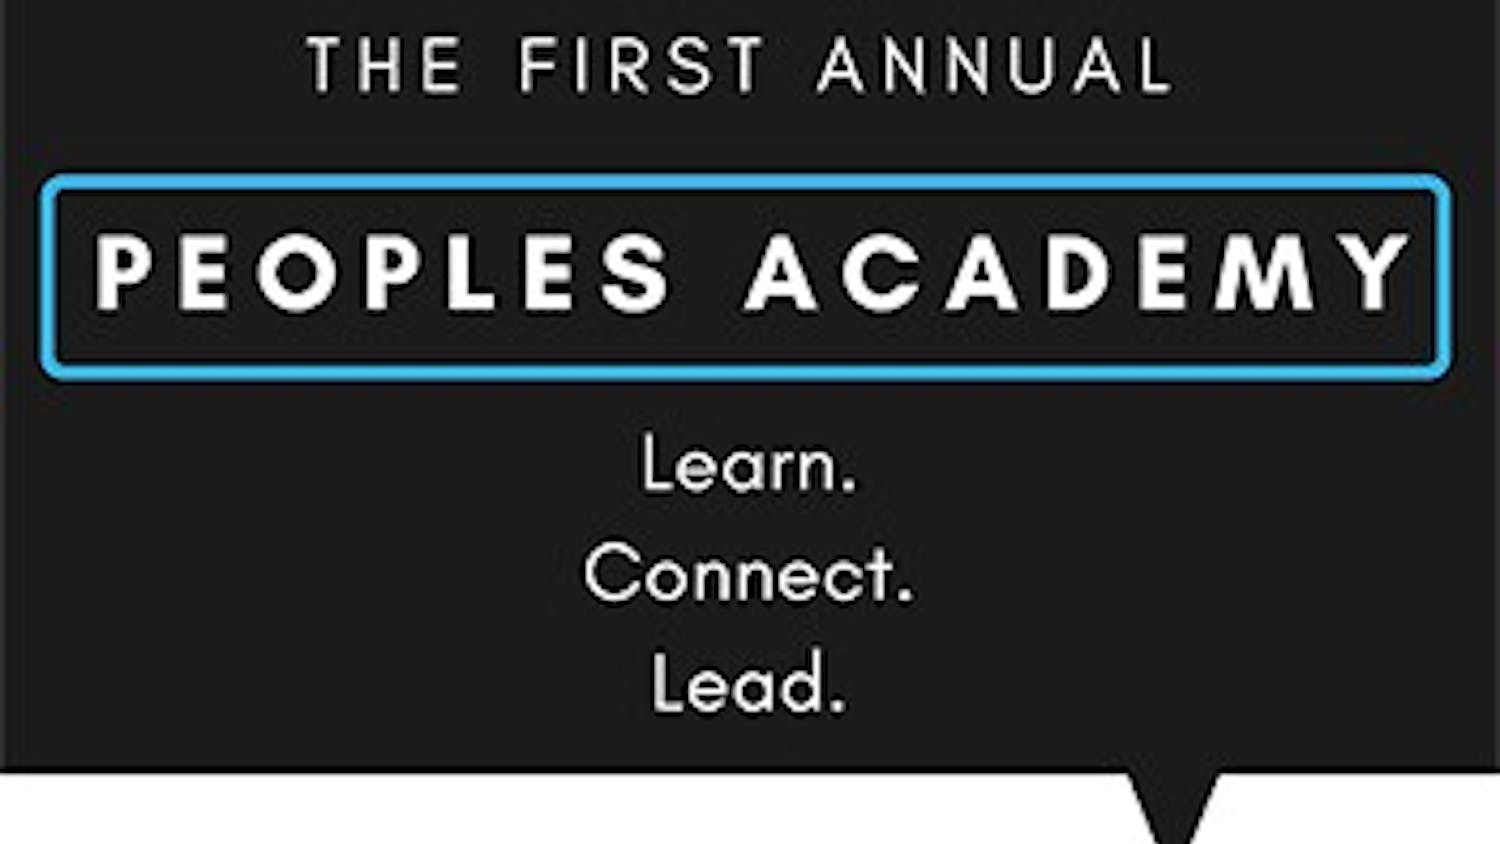 April 1 Peoples Academy Flyer